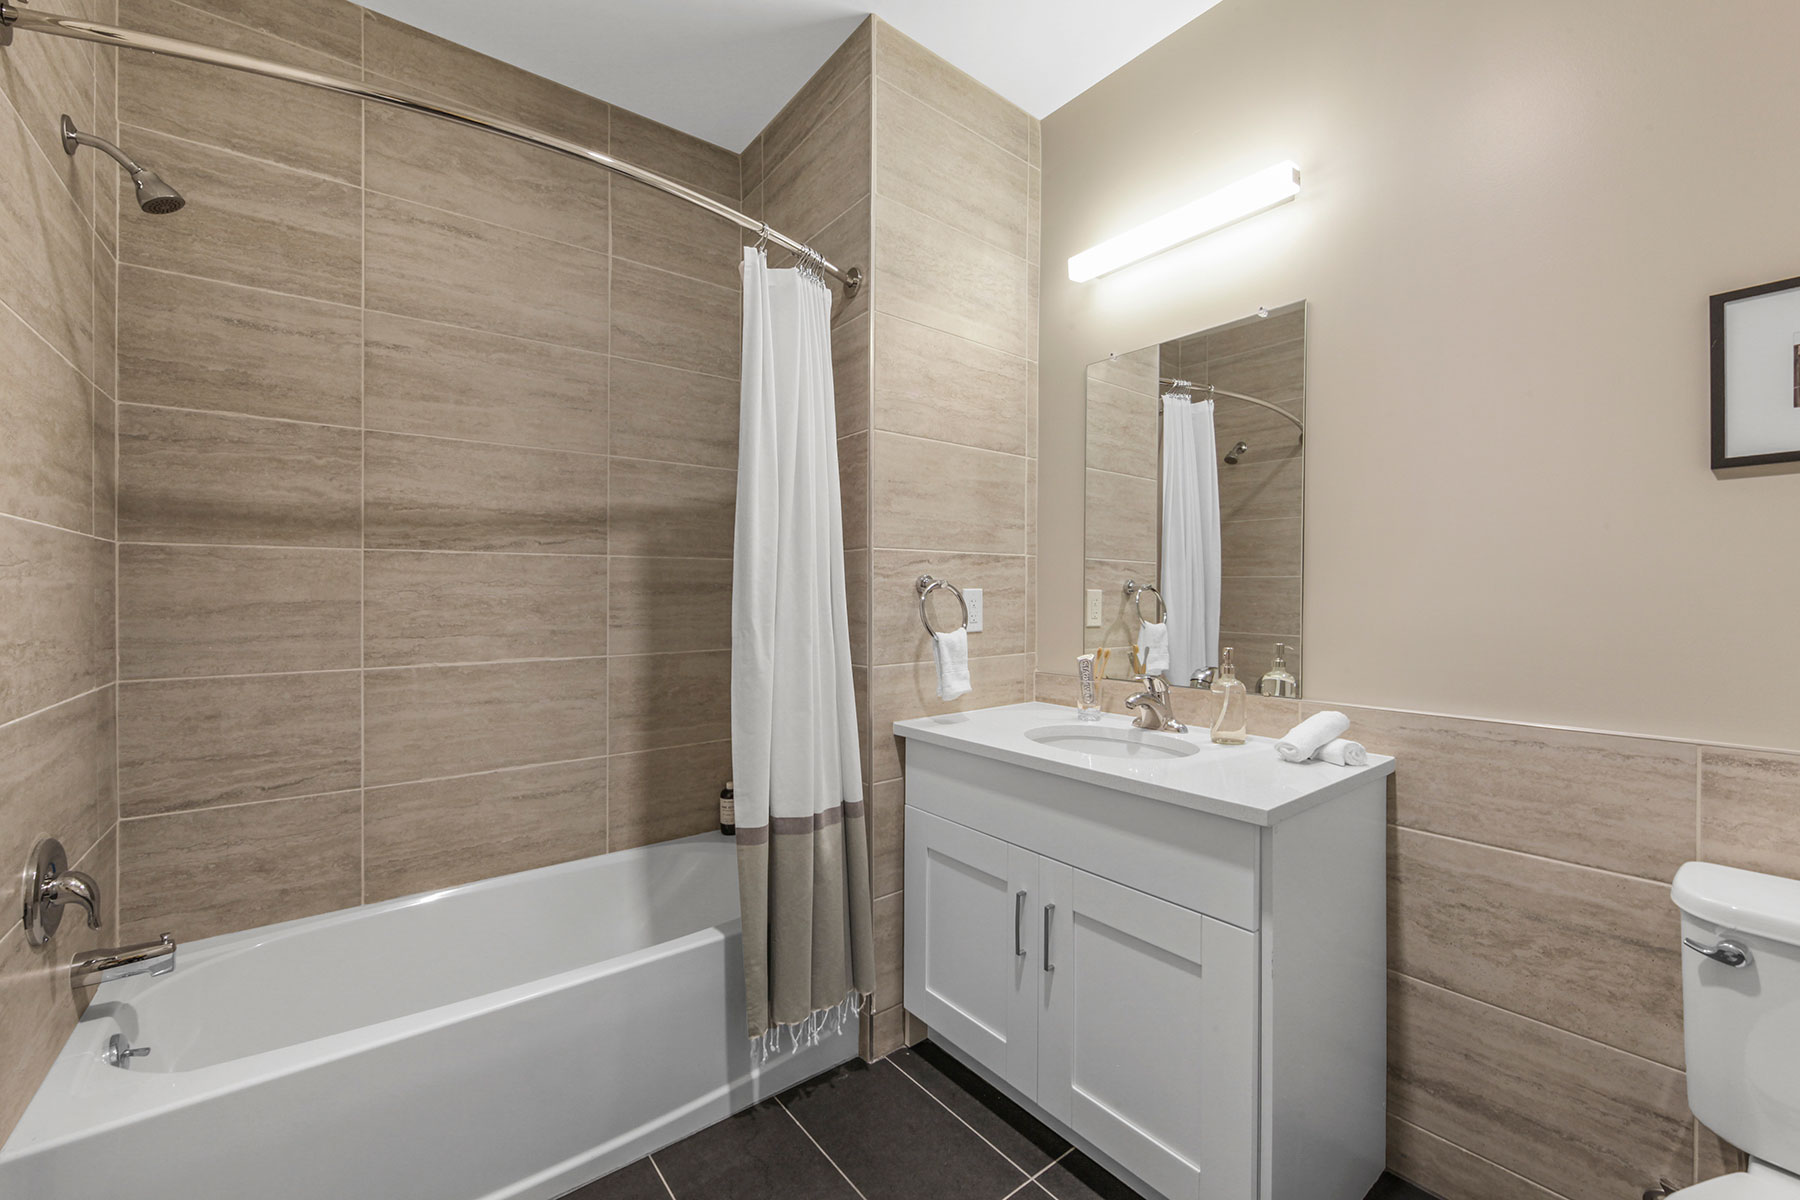 Modern bathroom with double cabinet white vanity, fully tiled tub shower, tiled floor and tiling halfway up wall